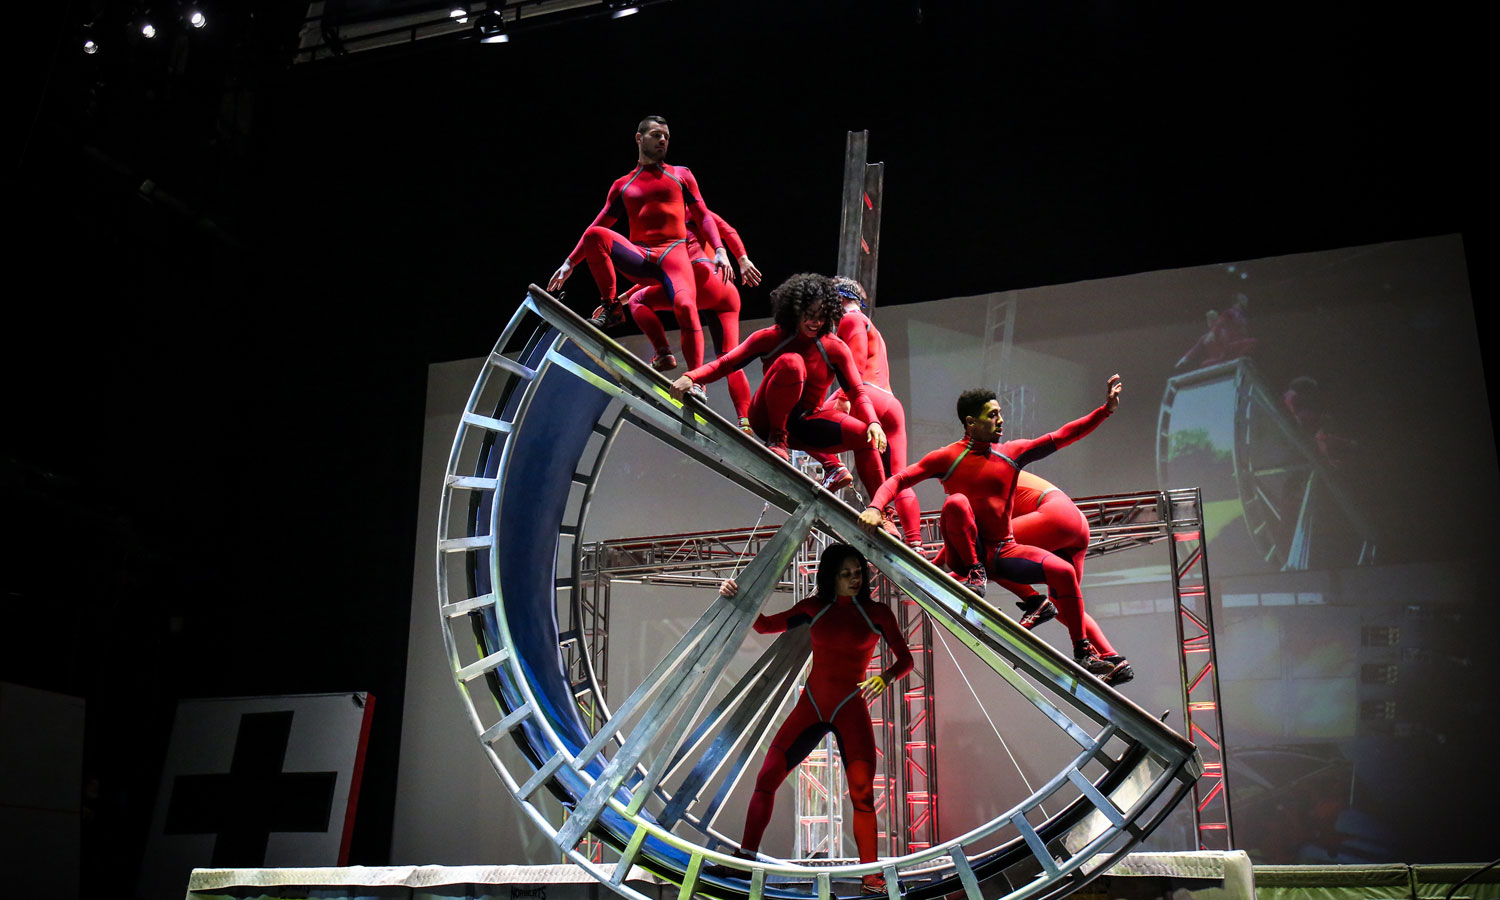 Streb Extreme Action's gravity-defying dance with danger